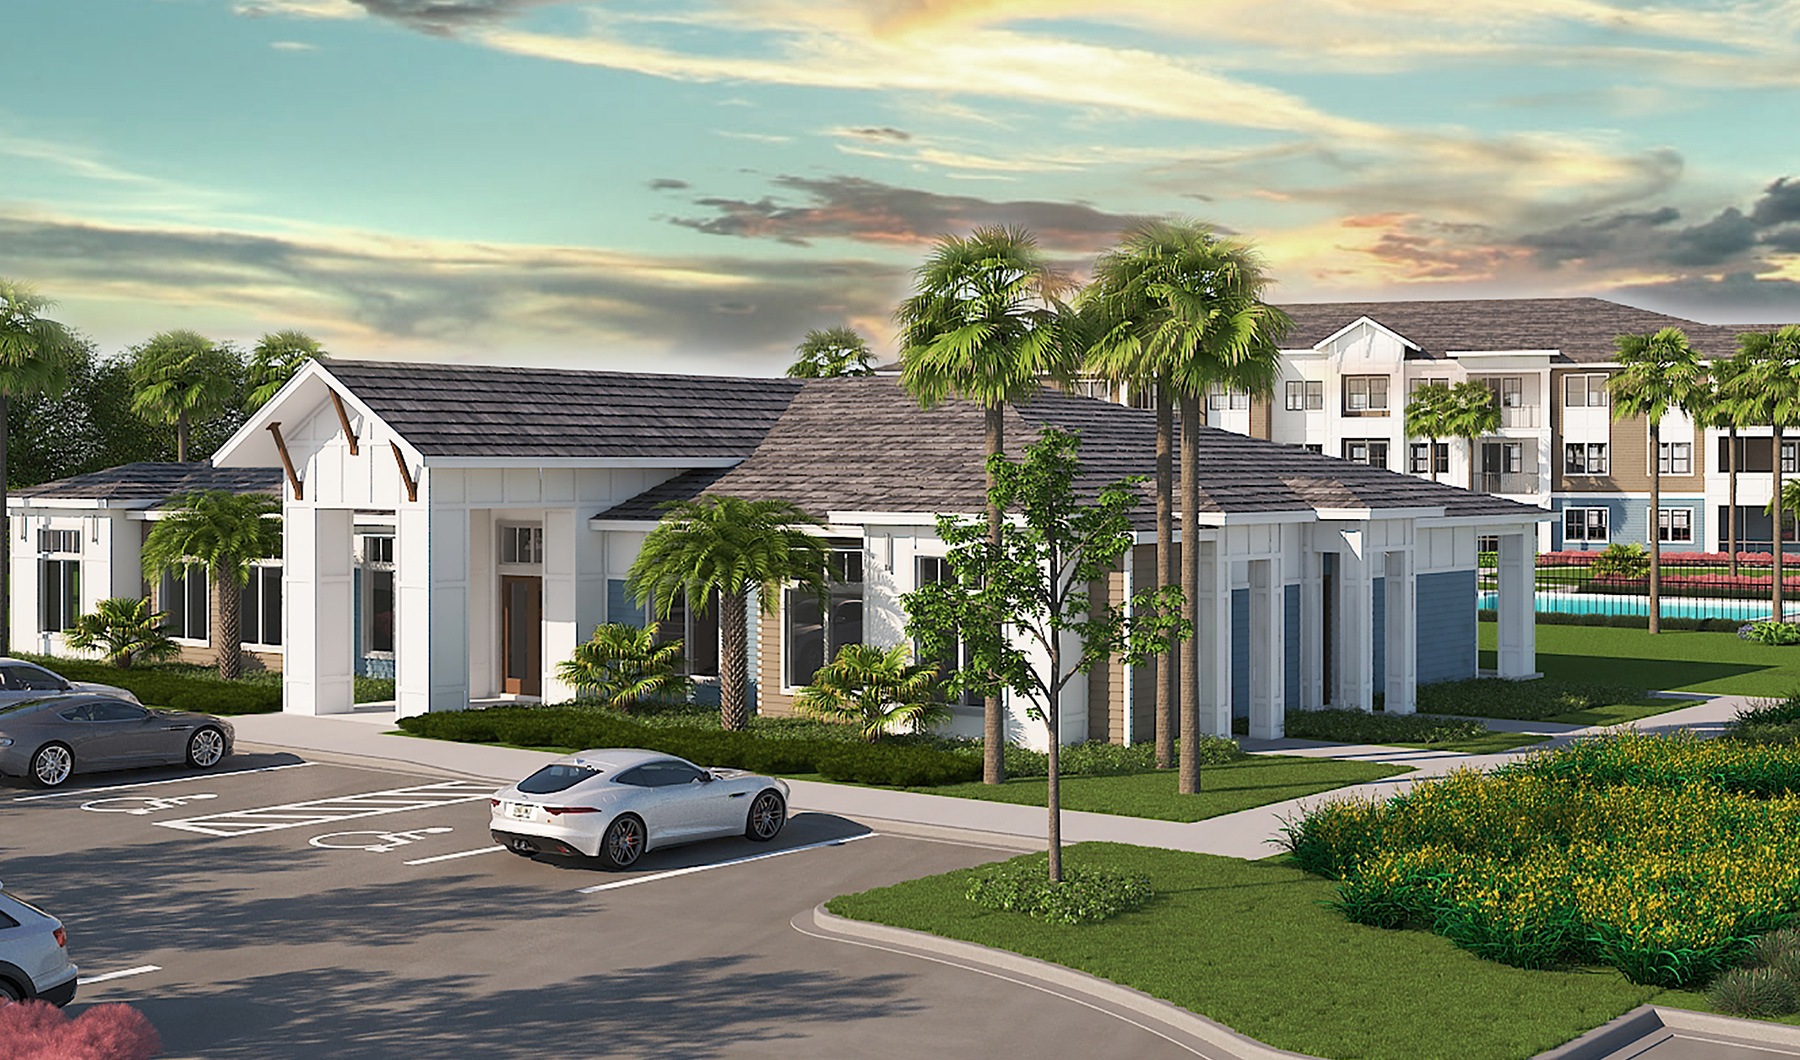 rendering of property exterior showing spacious walkways and greenery